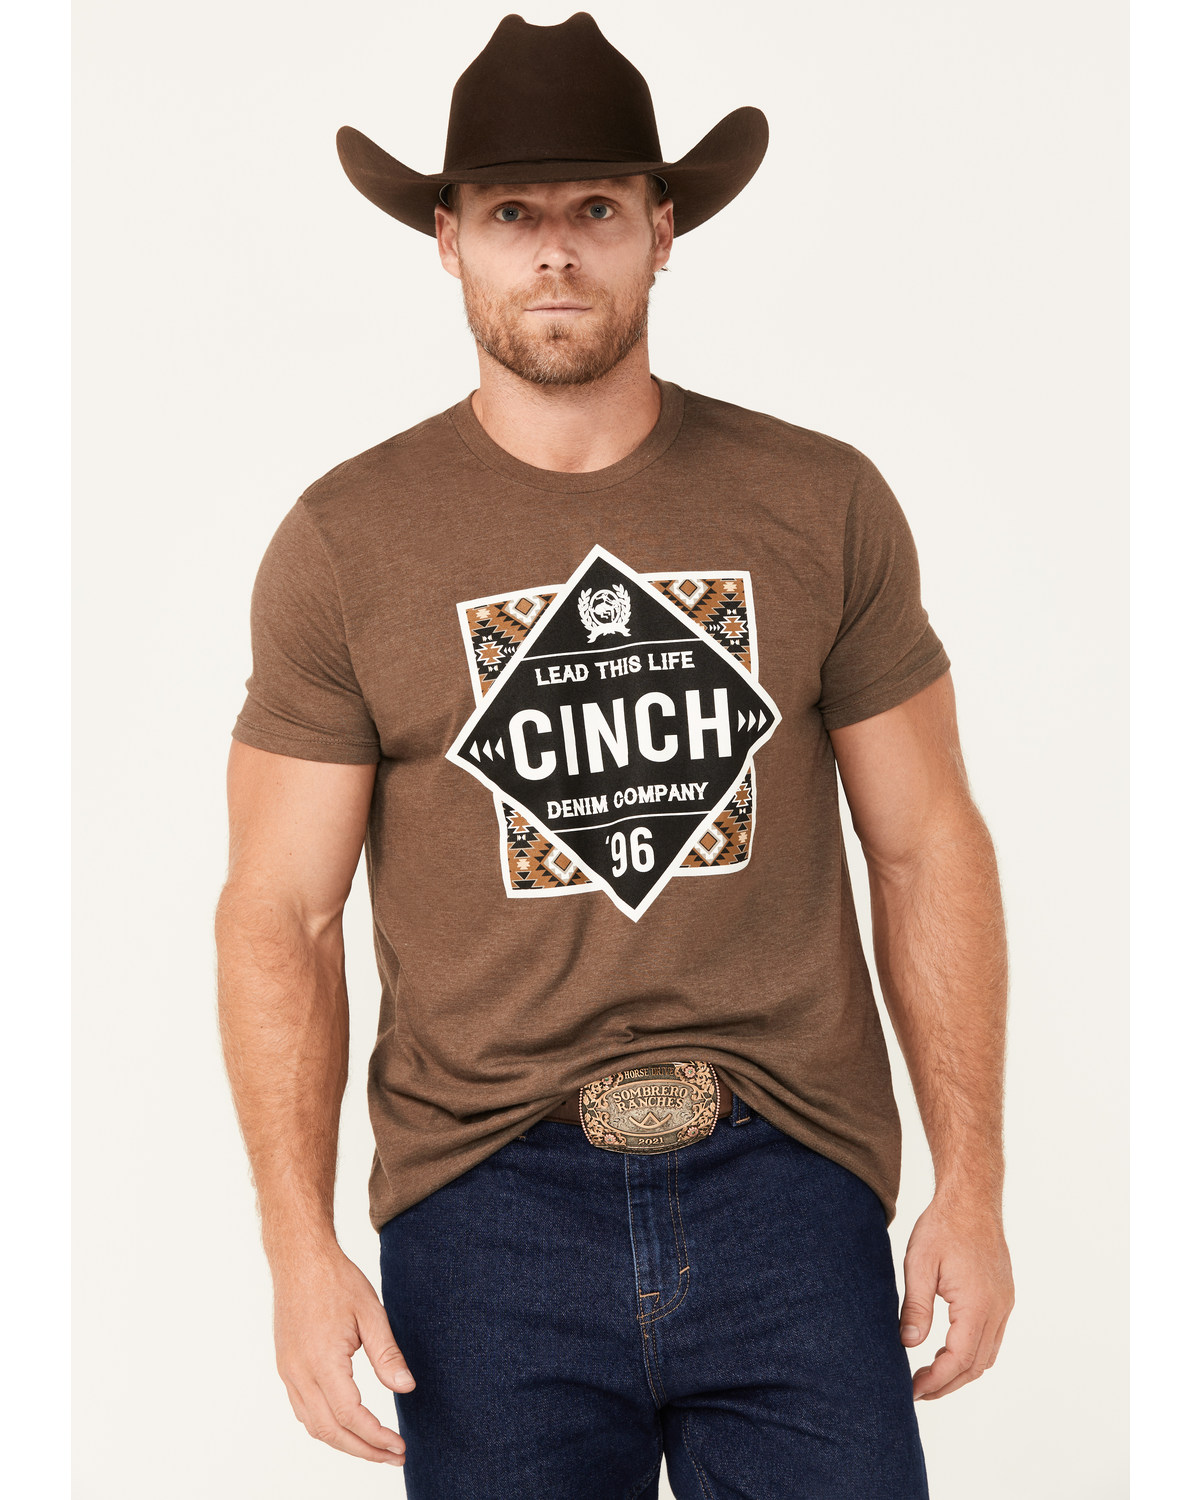 Cinch Men's Boot Barn Exclusive Lead This Life Short Sleeve Graphic T-Shirt